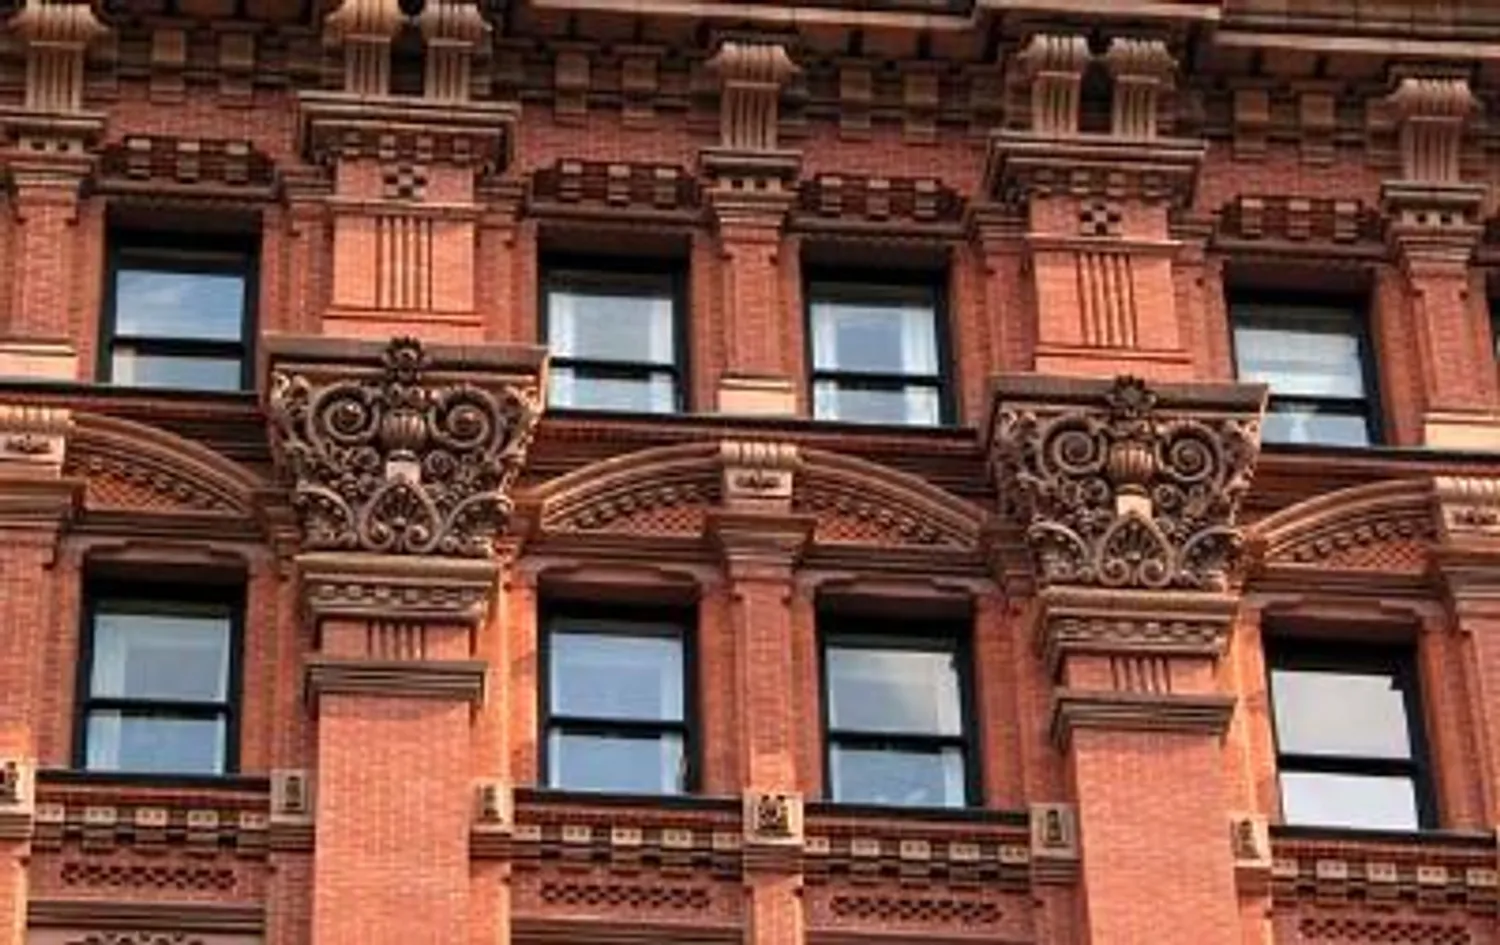 The Potter Building's landmarked facade